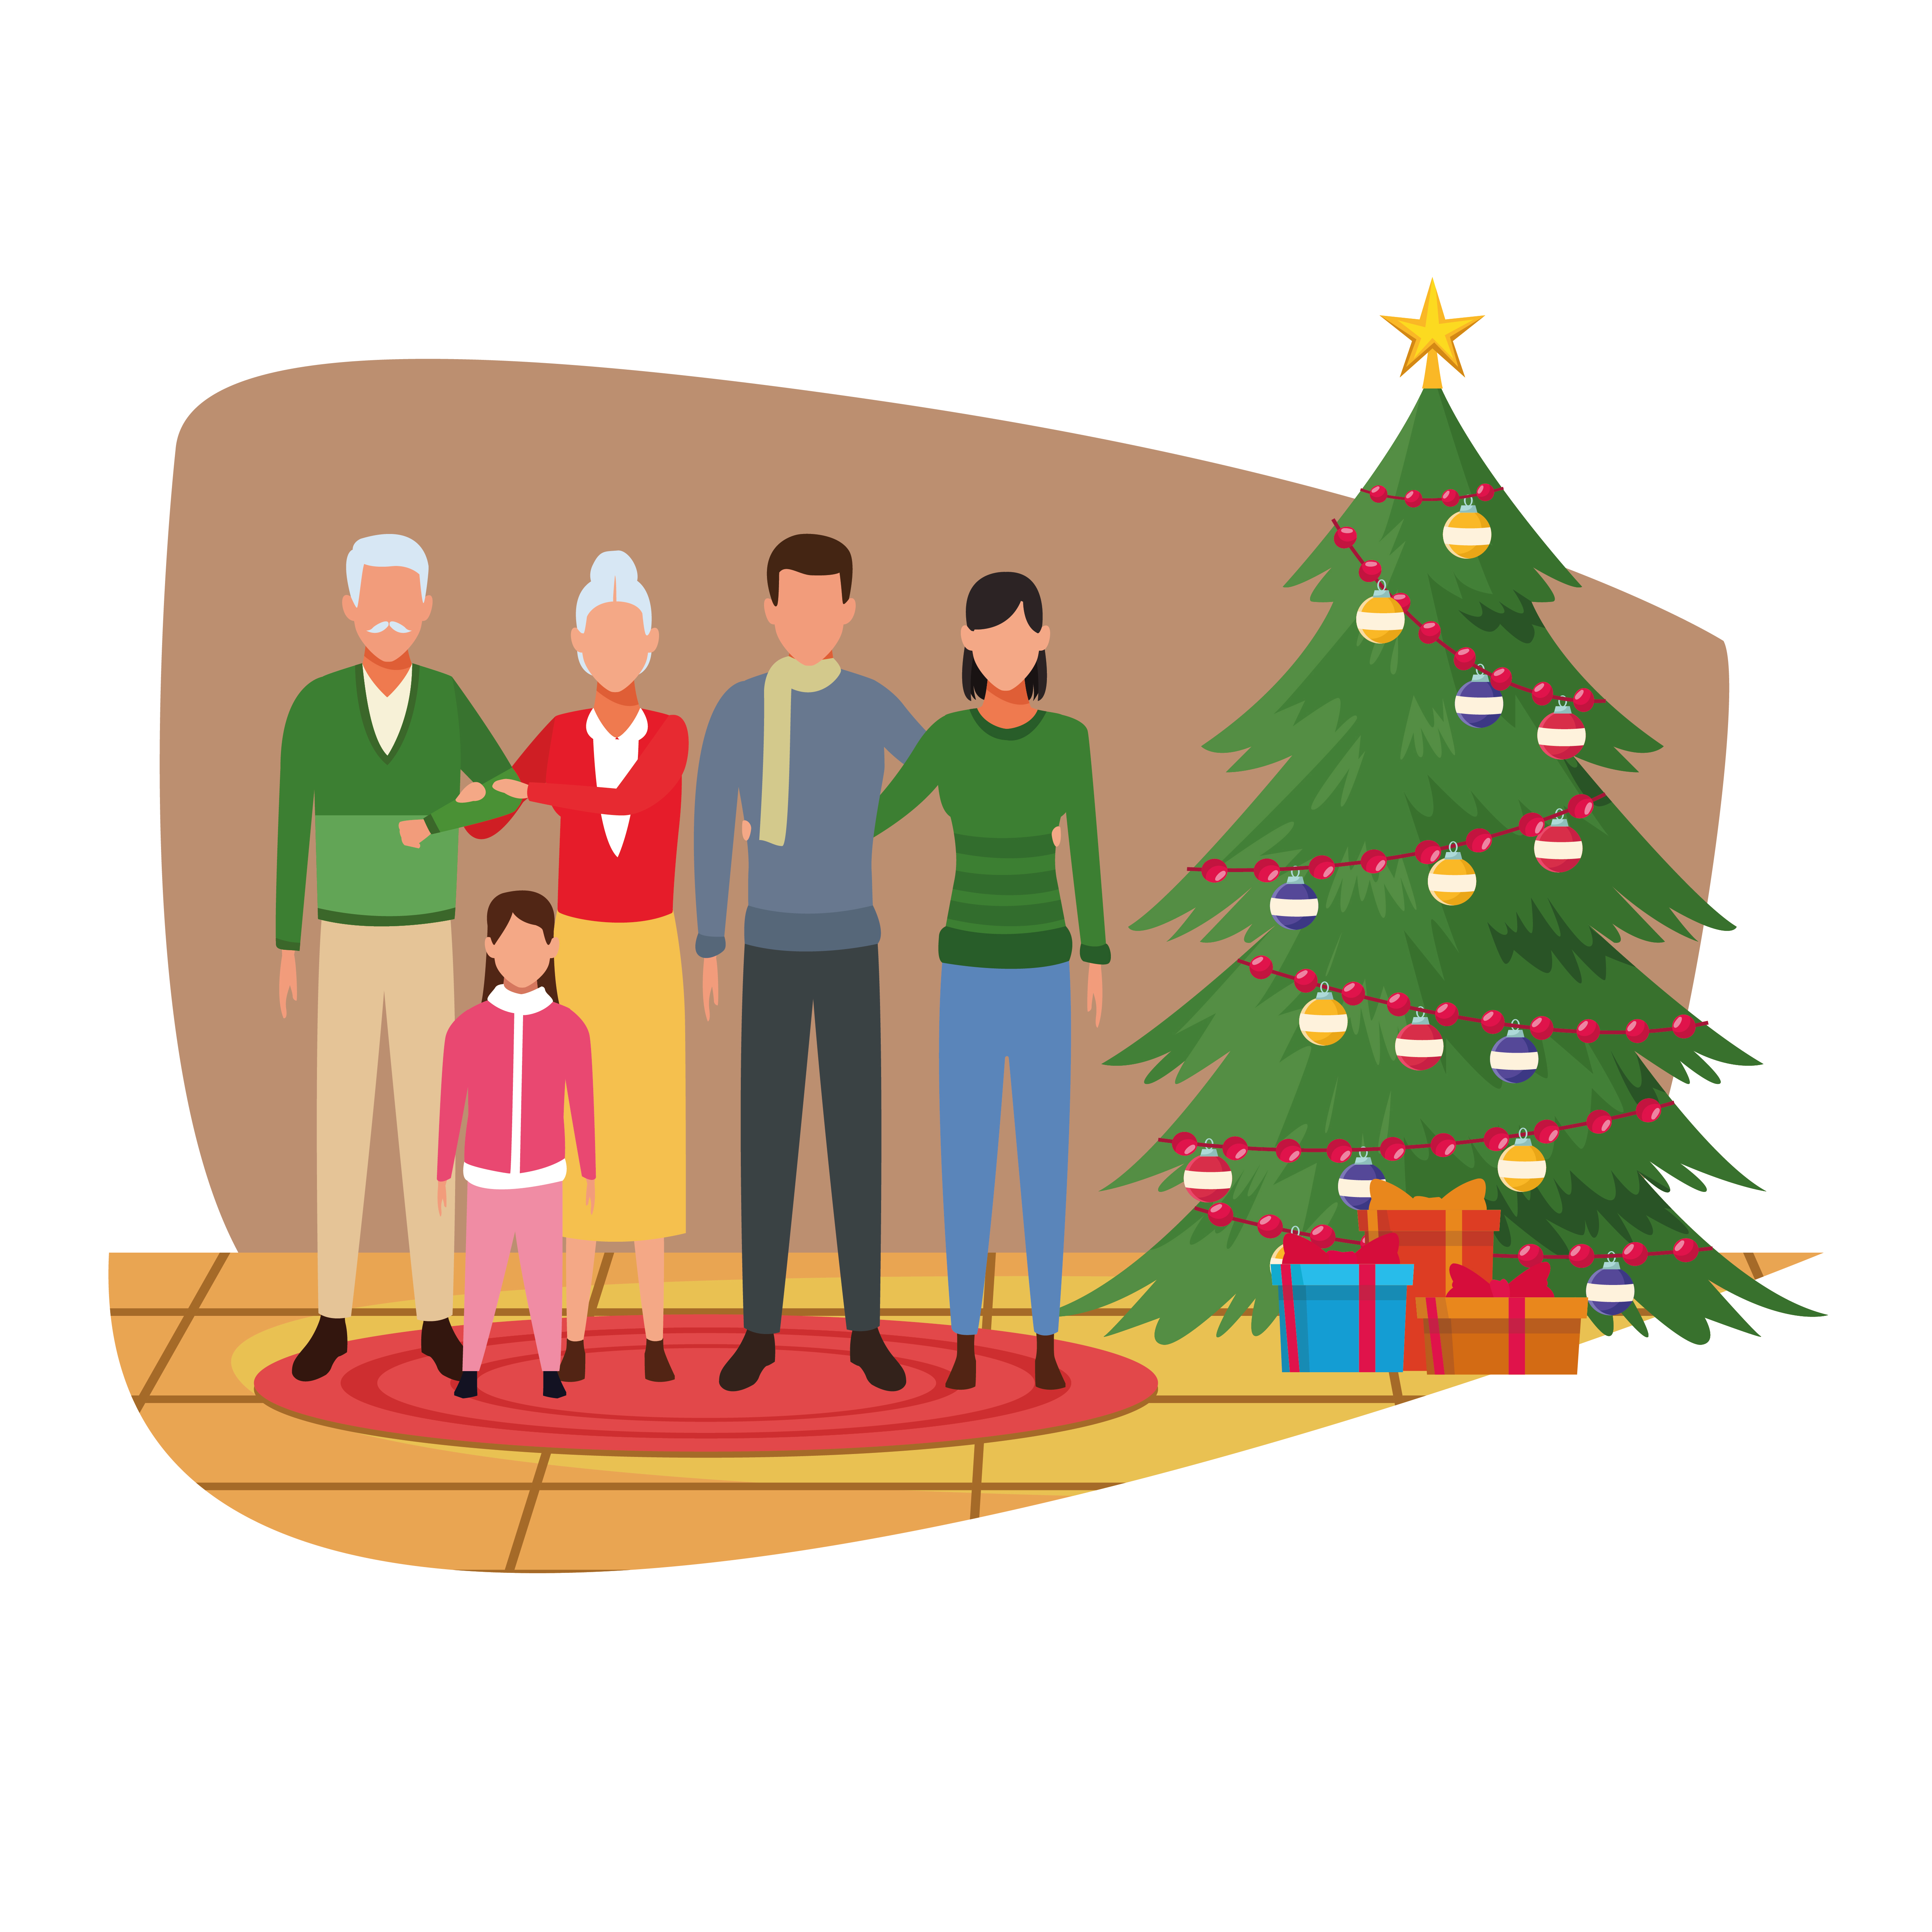 Download Merry Christmas in family - Download Free Vectors, Clipart ...